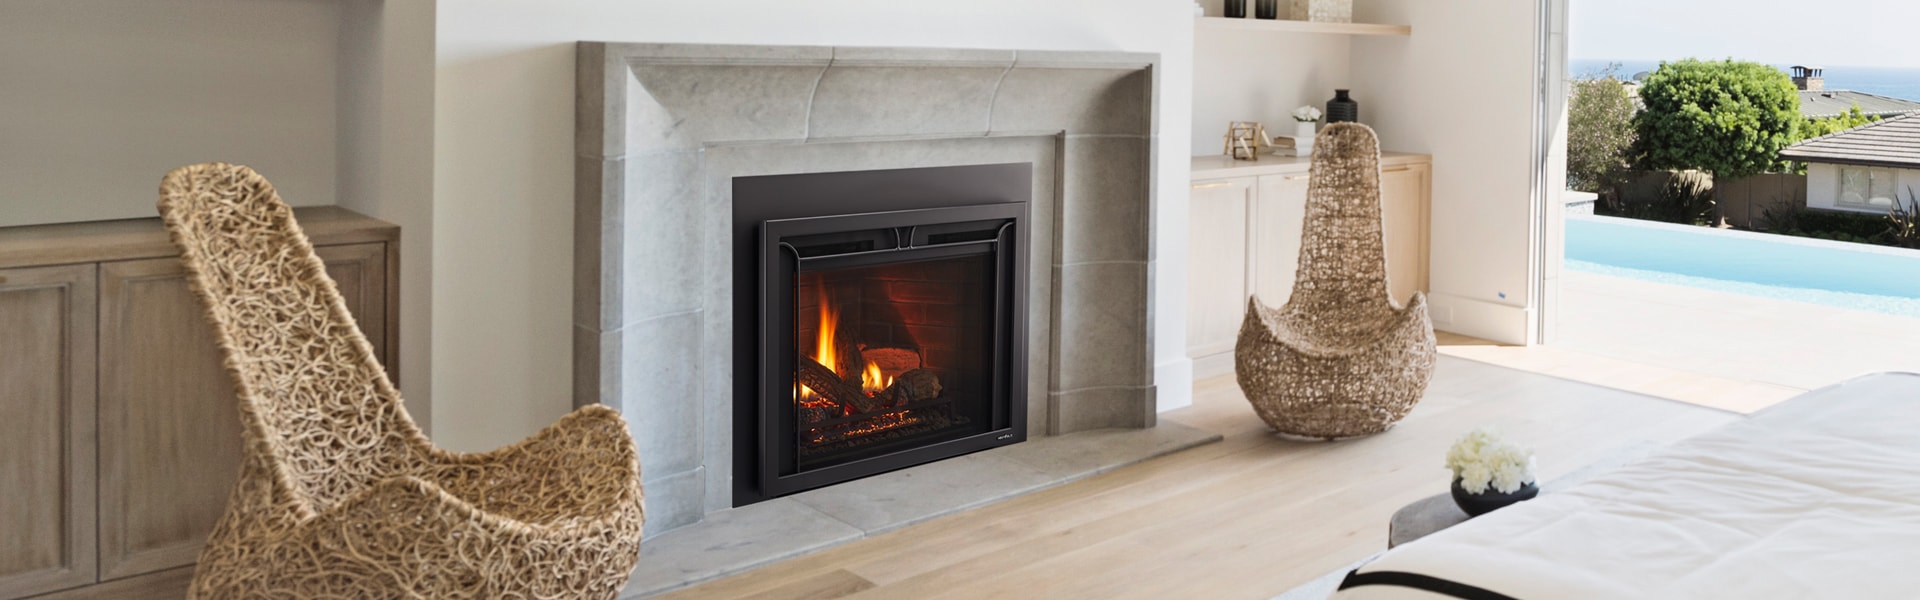 Small Natural Gas Fireplace New Escape Gas Firebrick Inserts